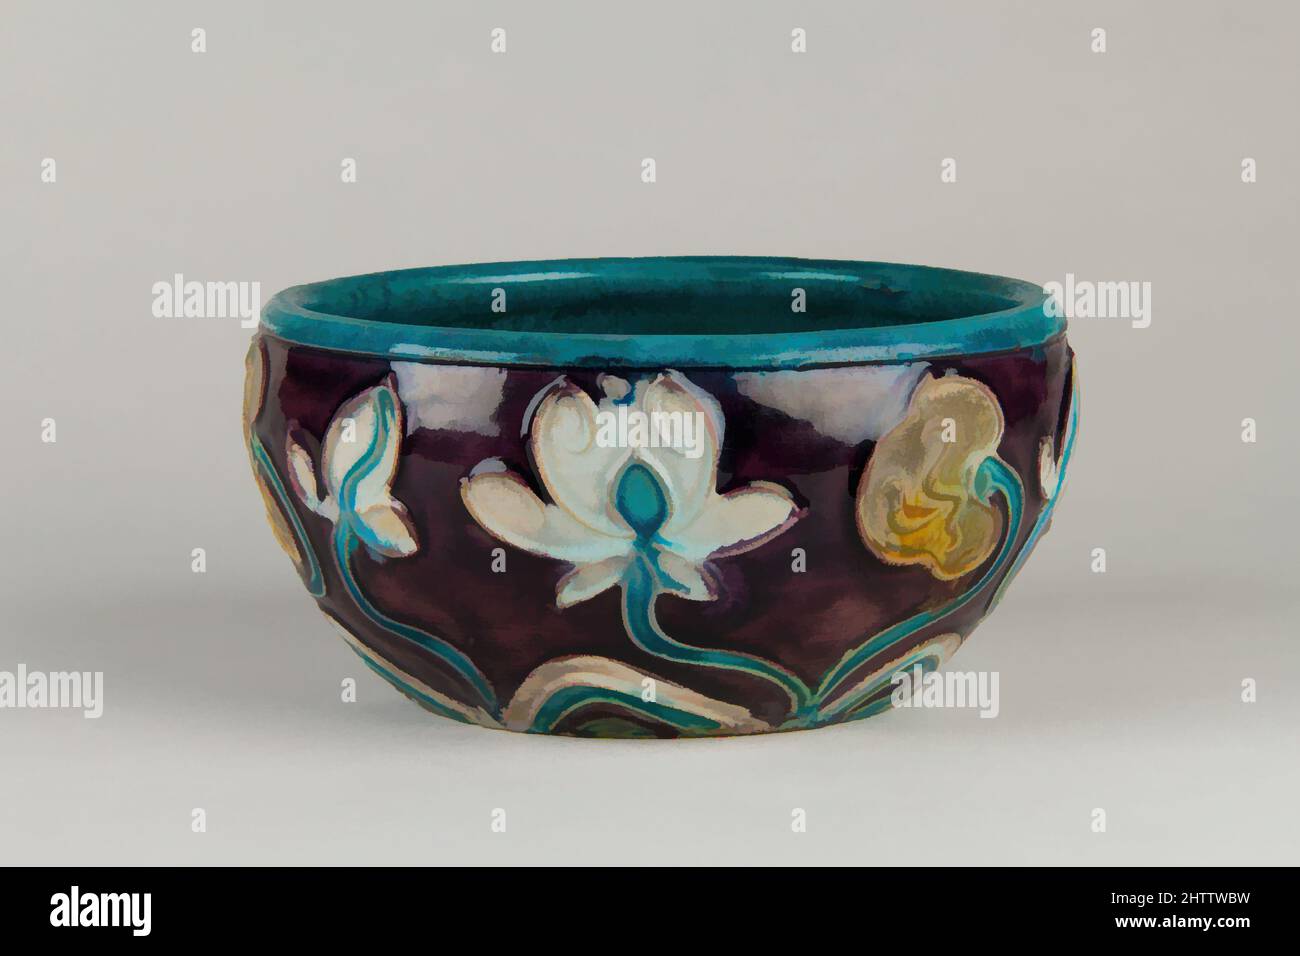 Art inspired by Bowl, Ming dynasty (1368–1644), China, Stoneware with cloisonné-style decoration, H. 3 5/8 in. (9.2 cm); W. 7 1/8 in. (18.1 cm), Ceramics, Classic works modernized by Artotop with a splash of modernity. Shapes, color and value, eye-catching visual impact on art. Emotions through freedom of artworks in a contemporary way. A timeless message pursuing a wildly creative new direction. Artists turning to the digital medium and creating the Artotop NFT Stock Photo